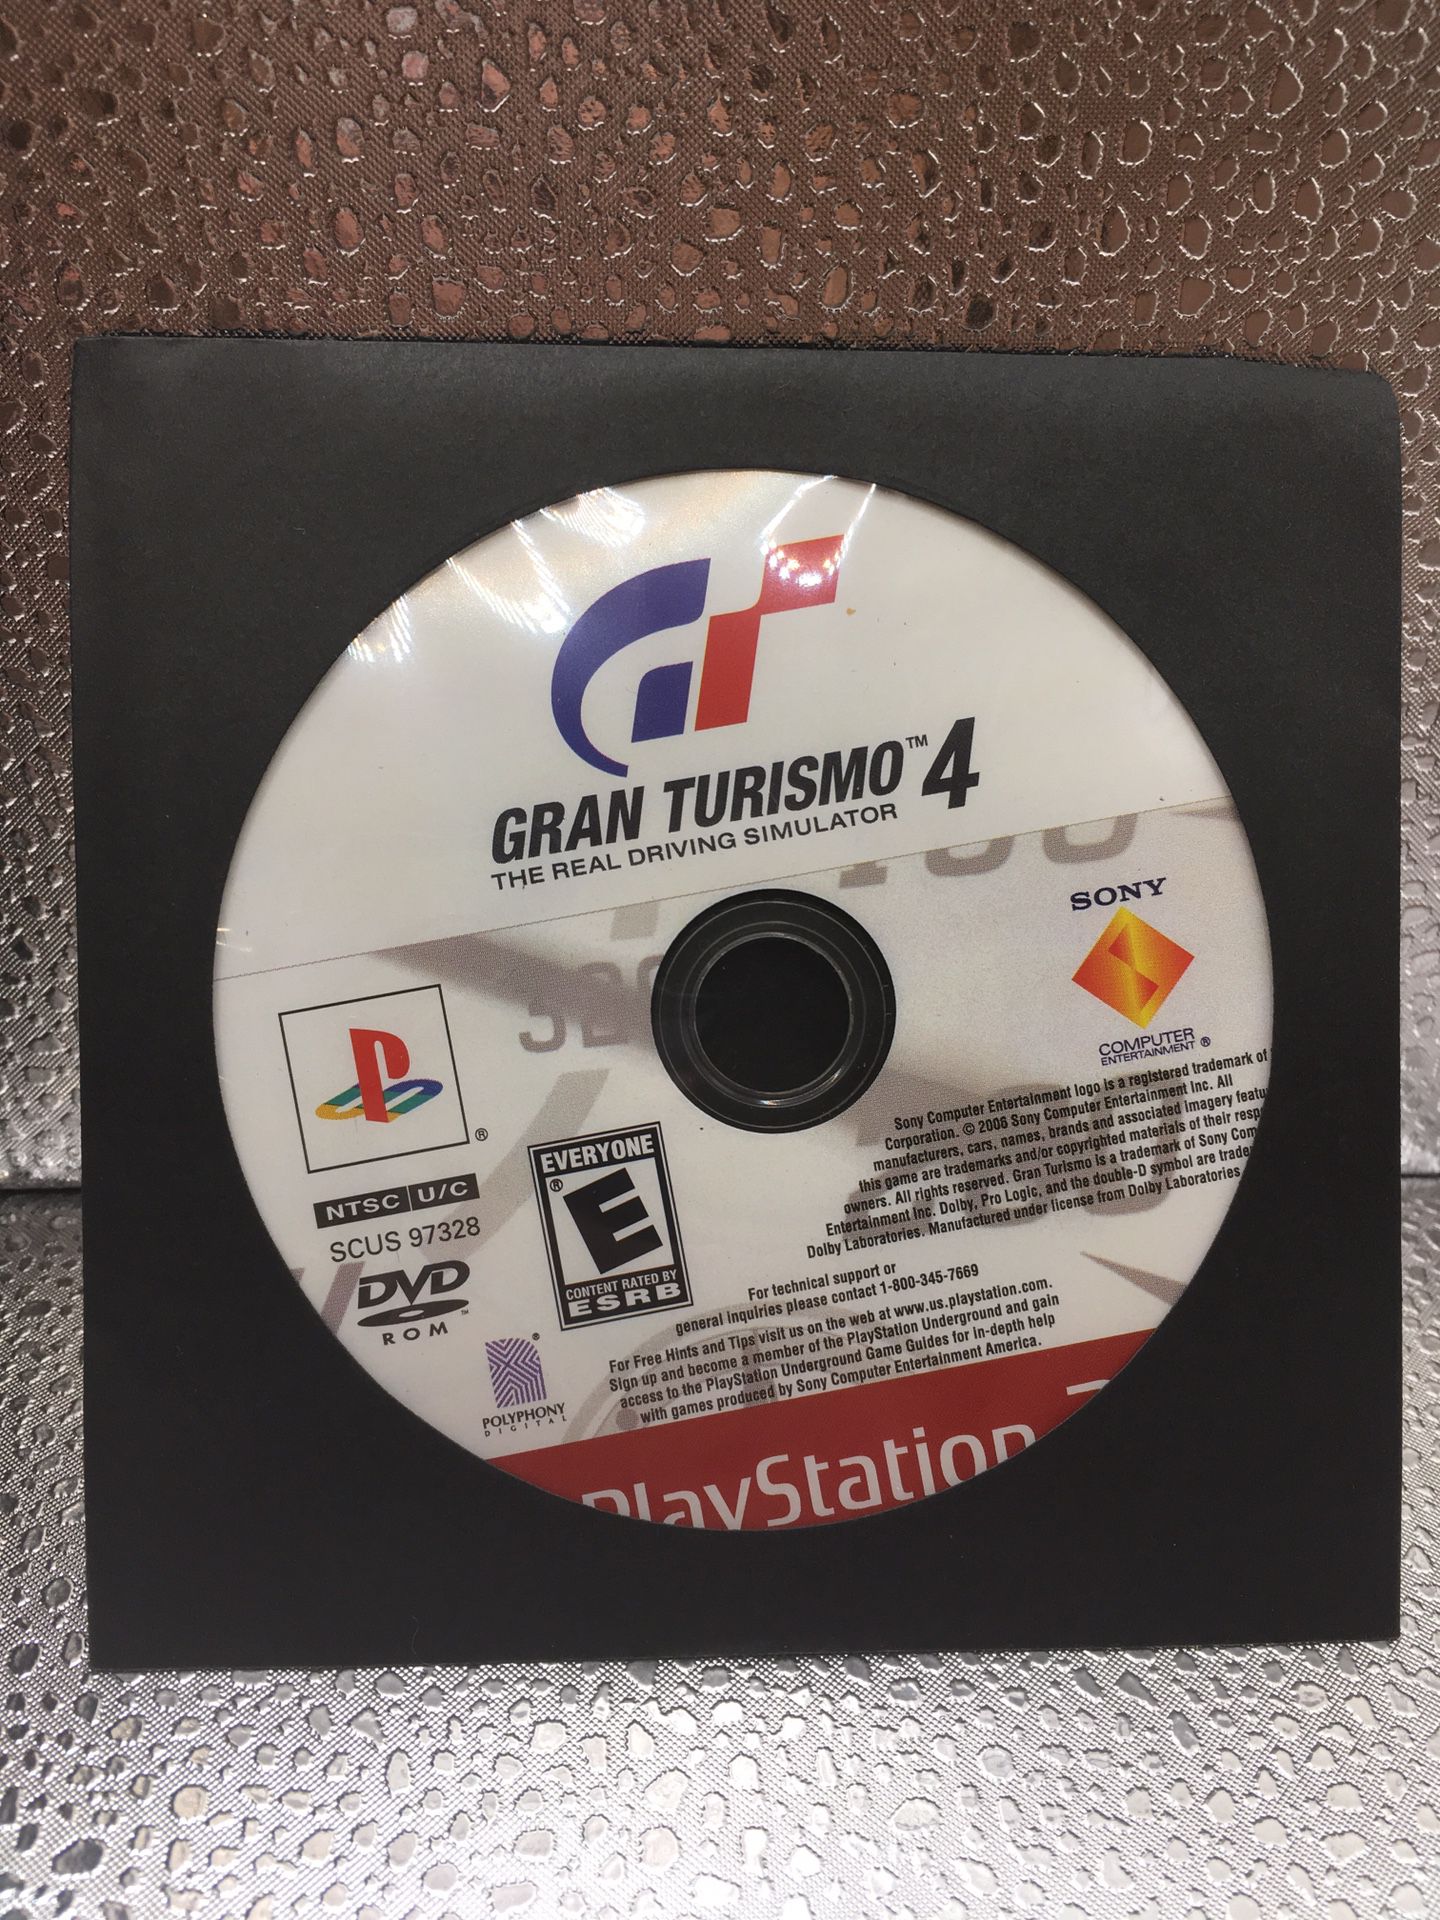 Gran Turismo 4 The Real Driving Simulator On Ps2 for Sale in Pelham, NY -  OfferUp